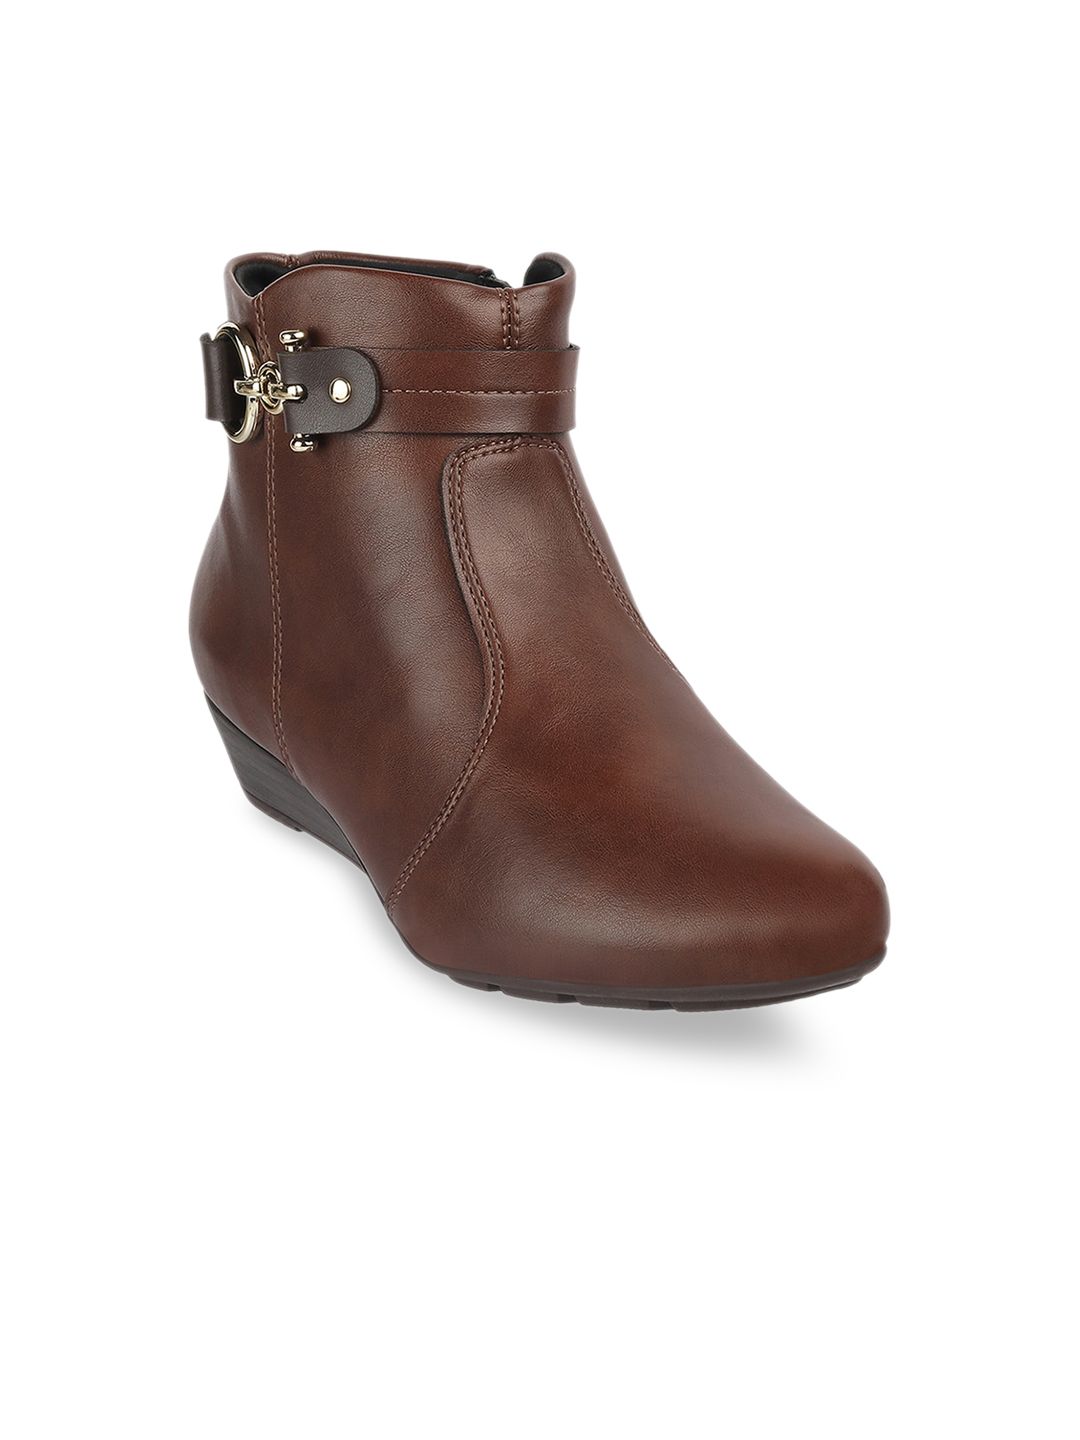 MODARE Brown PU Wedge Heeled Boots Price in India